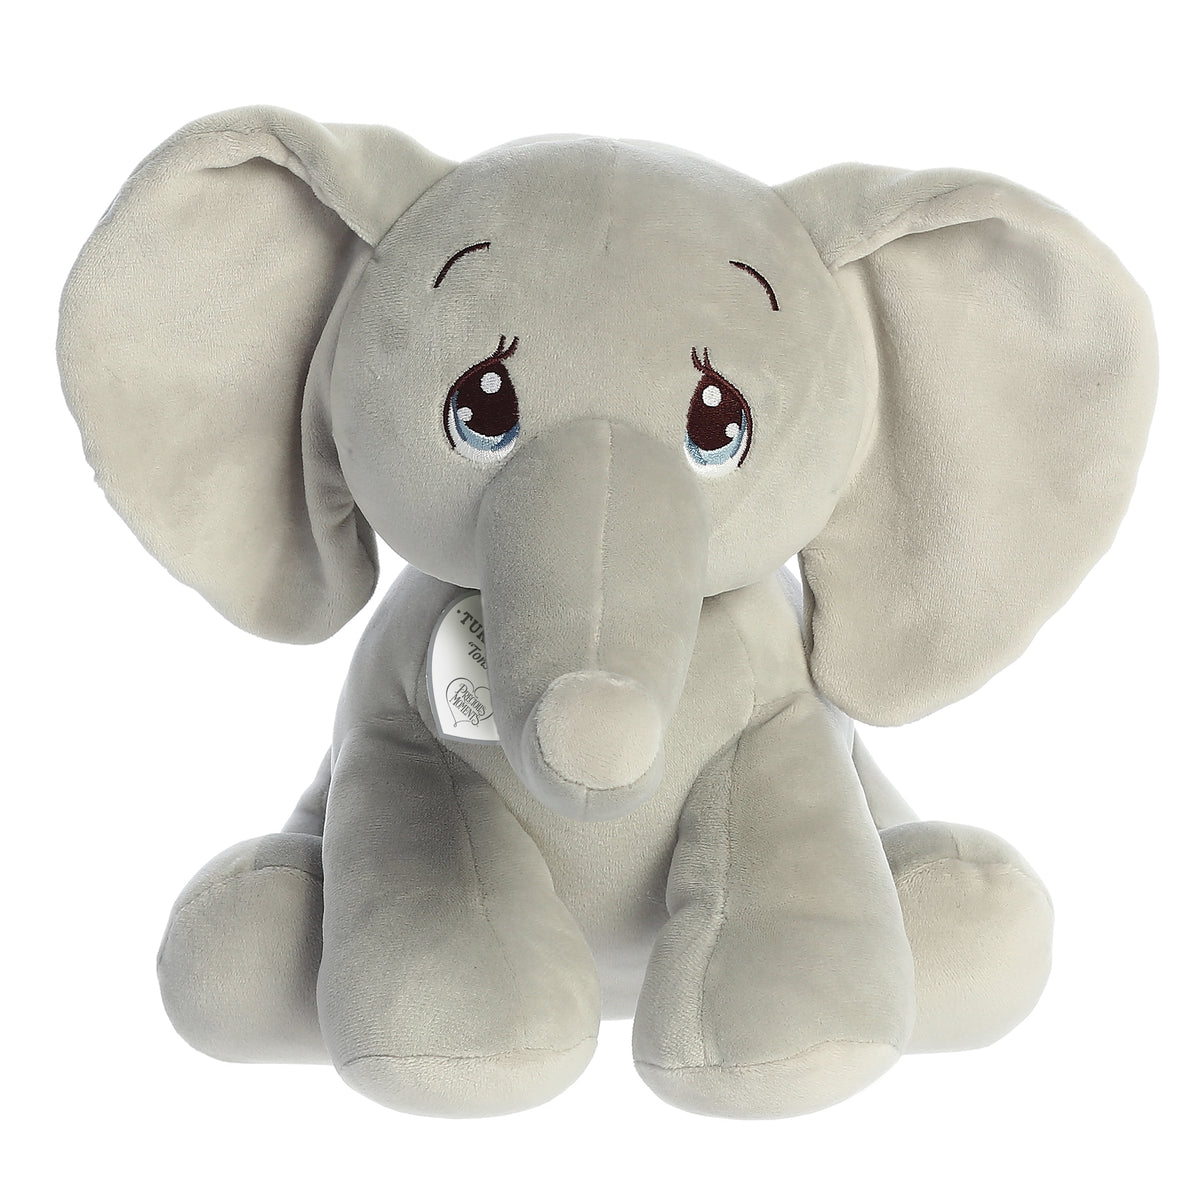 A seated squishy elephant plush with big teardrop-shaped eyes, flappy ears, and an inspirational tag.